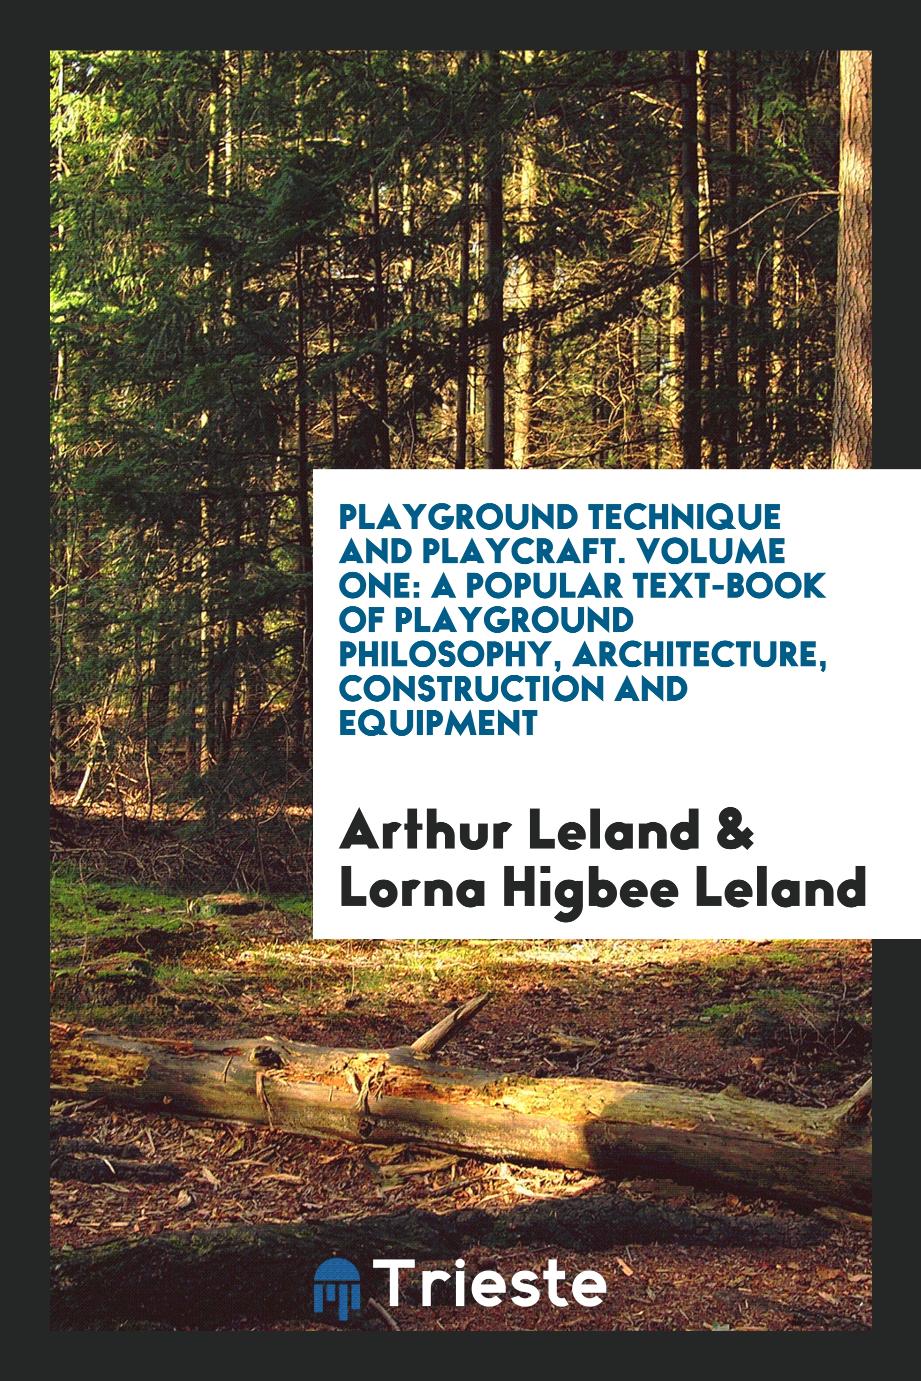 Playground Technique and Playcraft. Volume One: A Popular Text-Book of Playground Philosophy, Architecture, Construction and Equipment